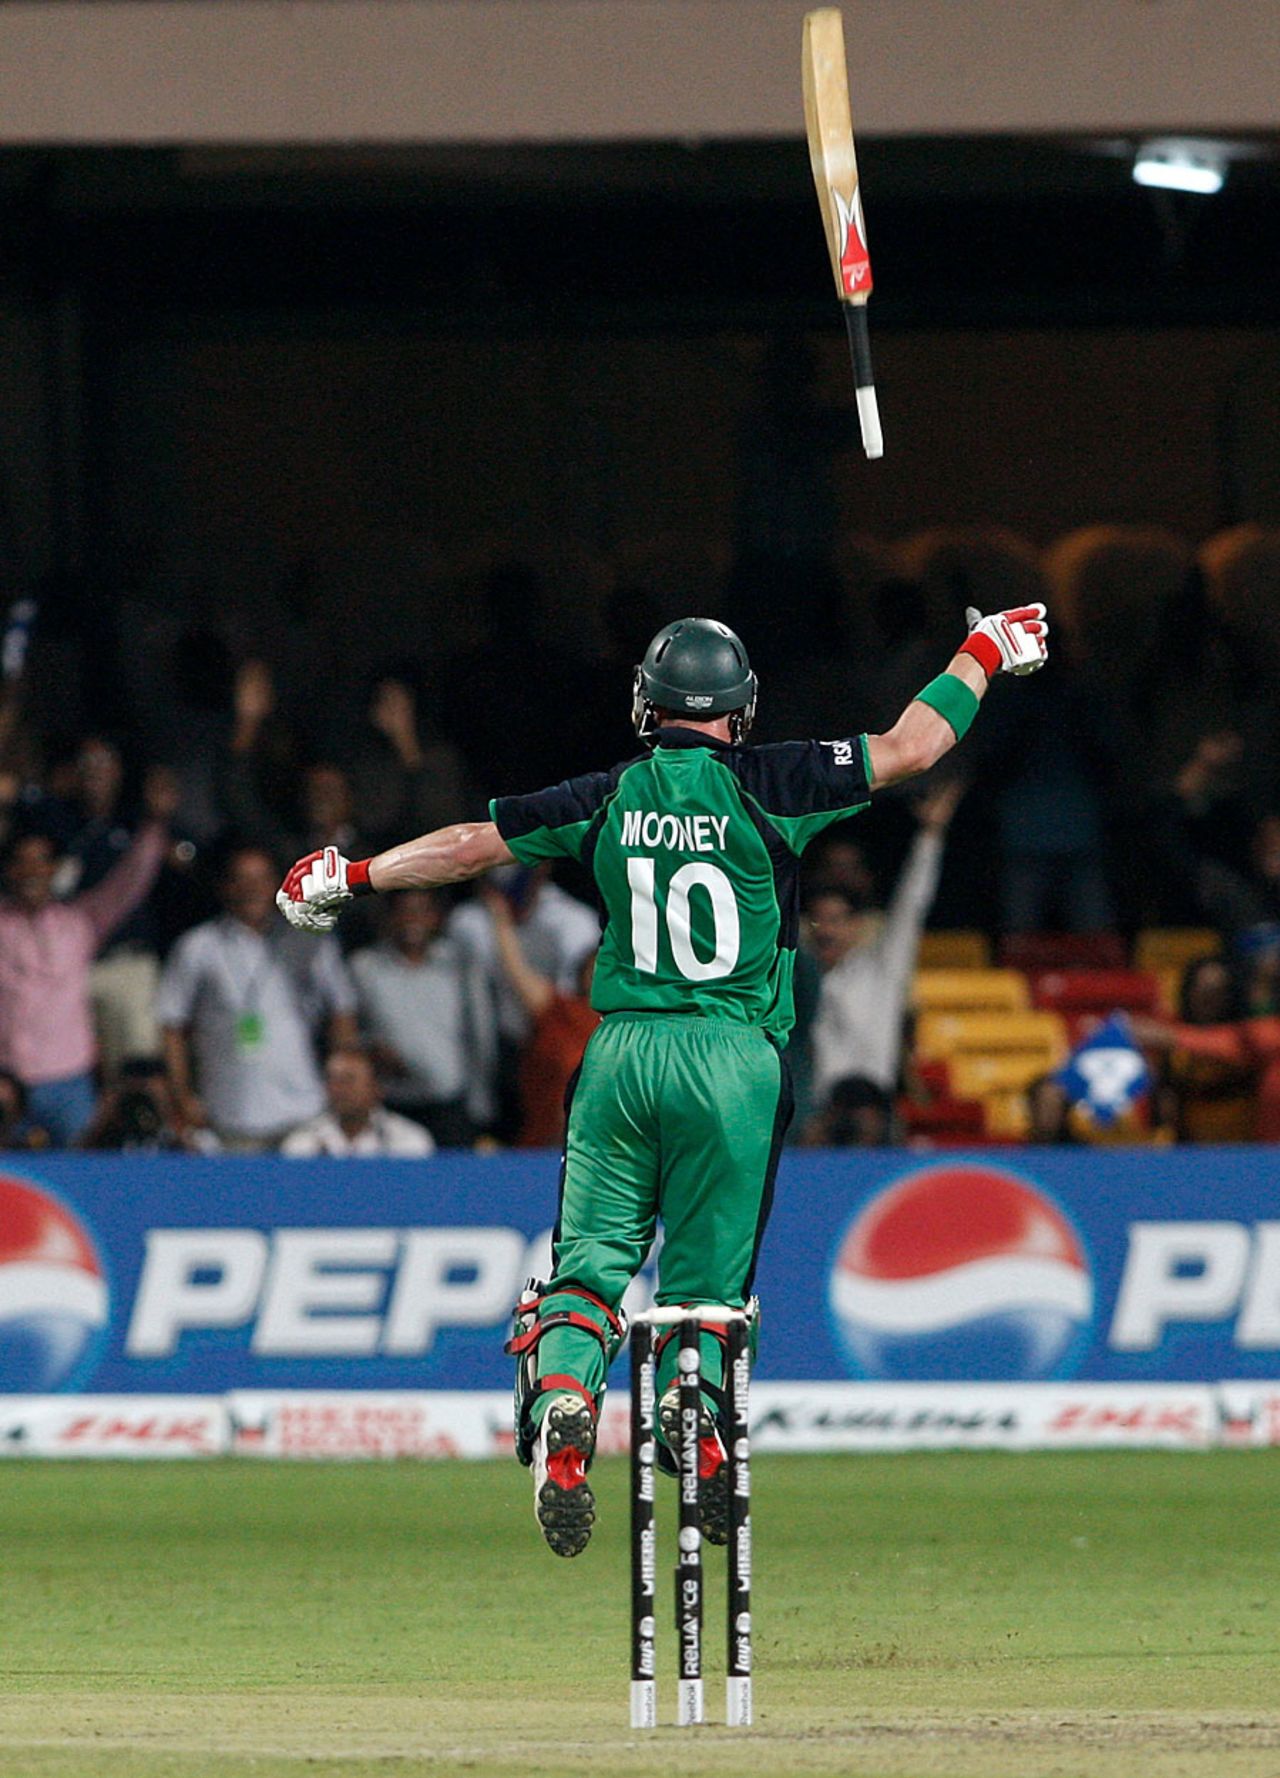 John Mooney flings his bat in the air after securing a dream result with a boundary, England v Ireland, World Cup 2011, Bangalore, March 2, 2011